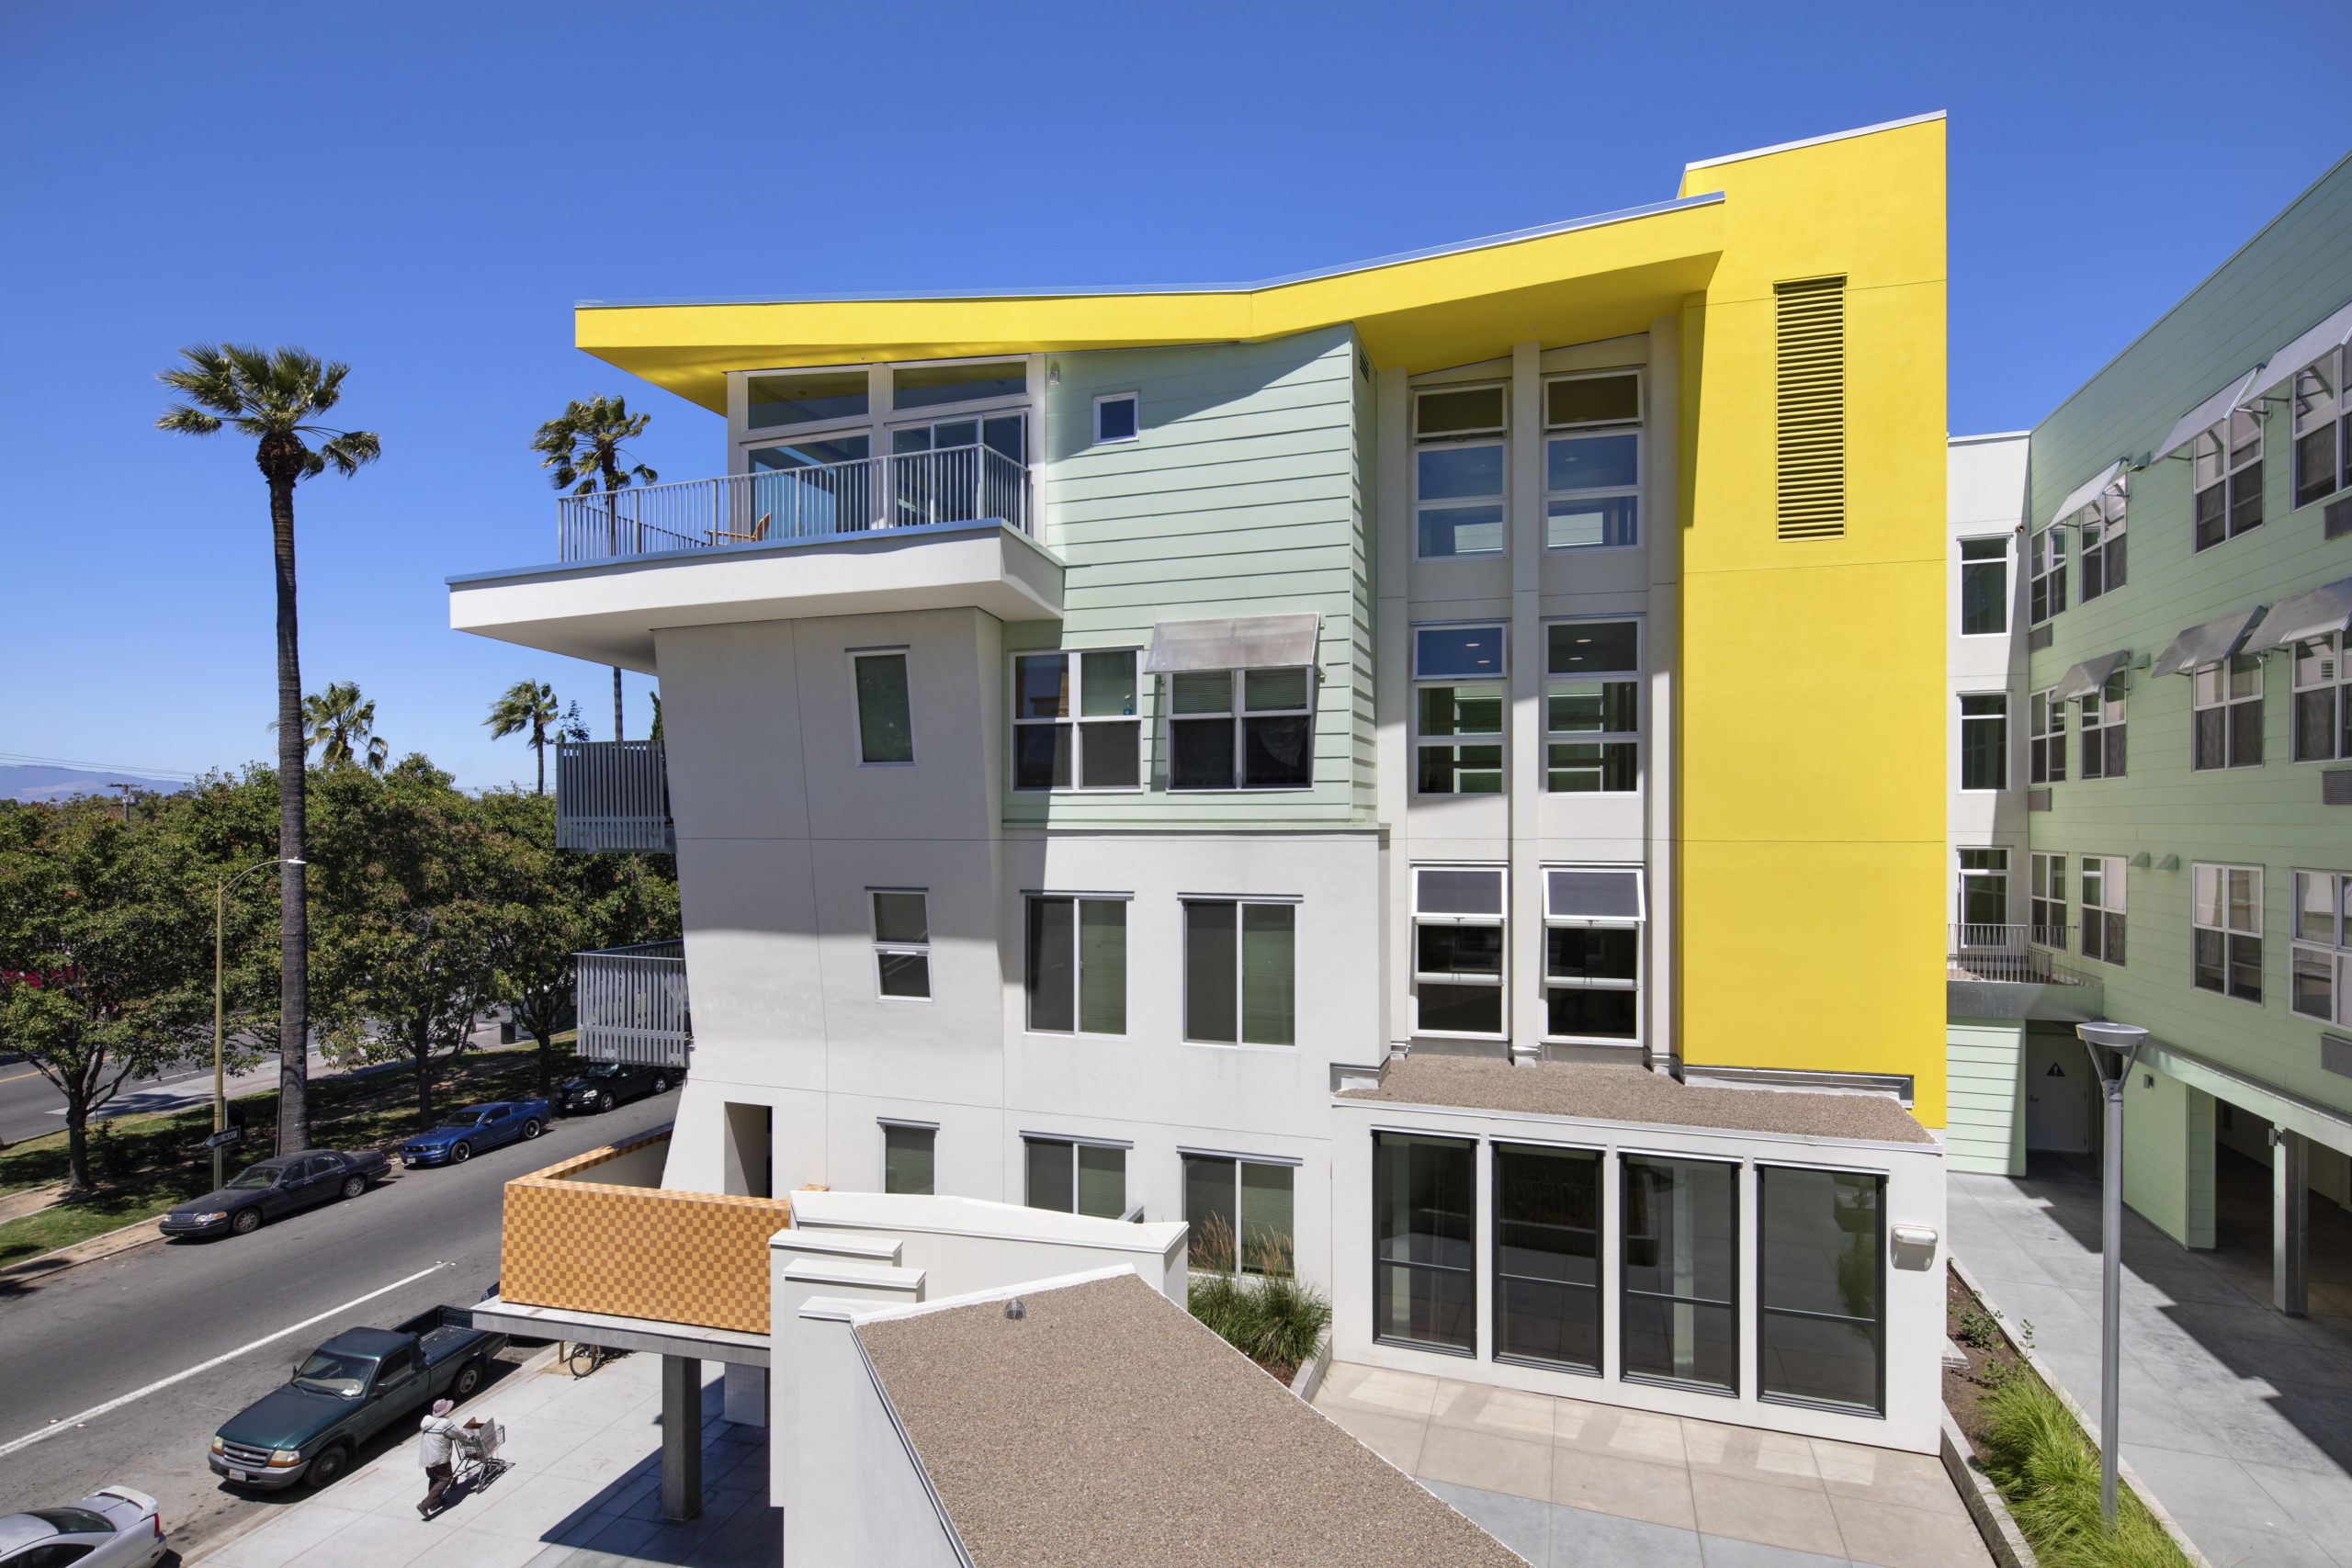 First Community Housing is an experienced green builder that pushed the envelope with Second Street Studios, in San Jose, California by implementing modular construction on a large scale.